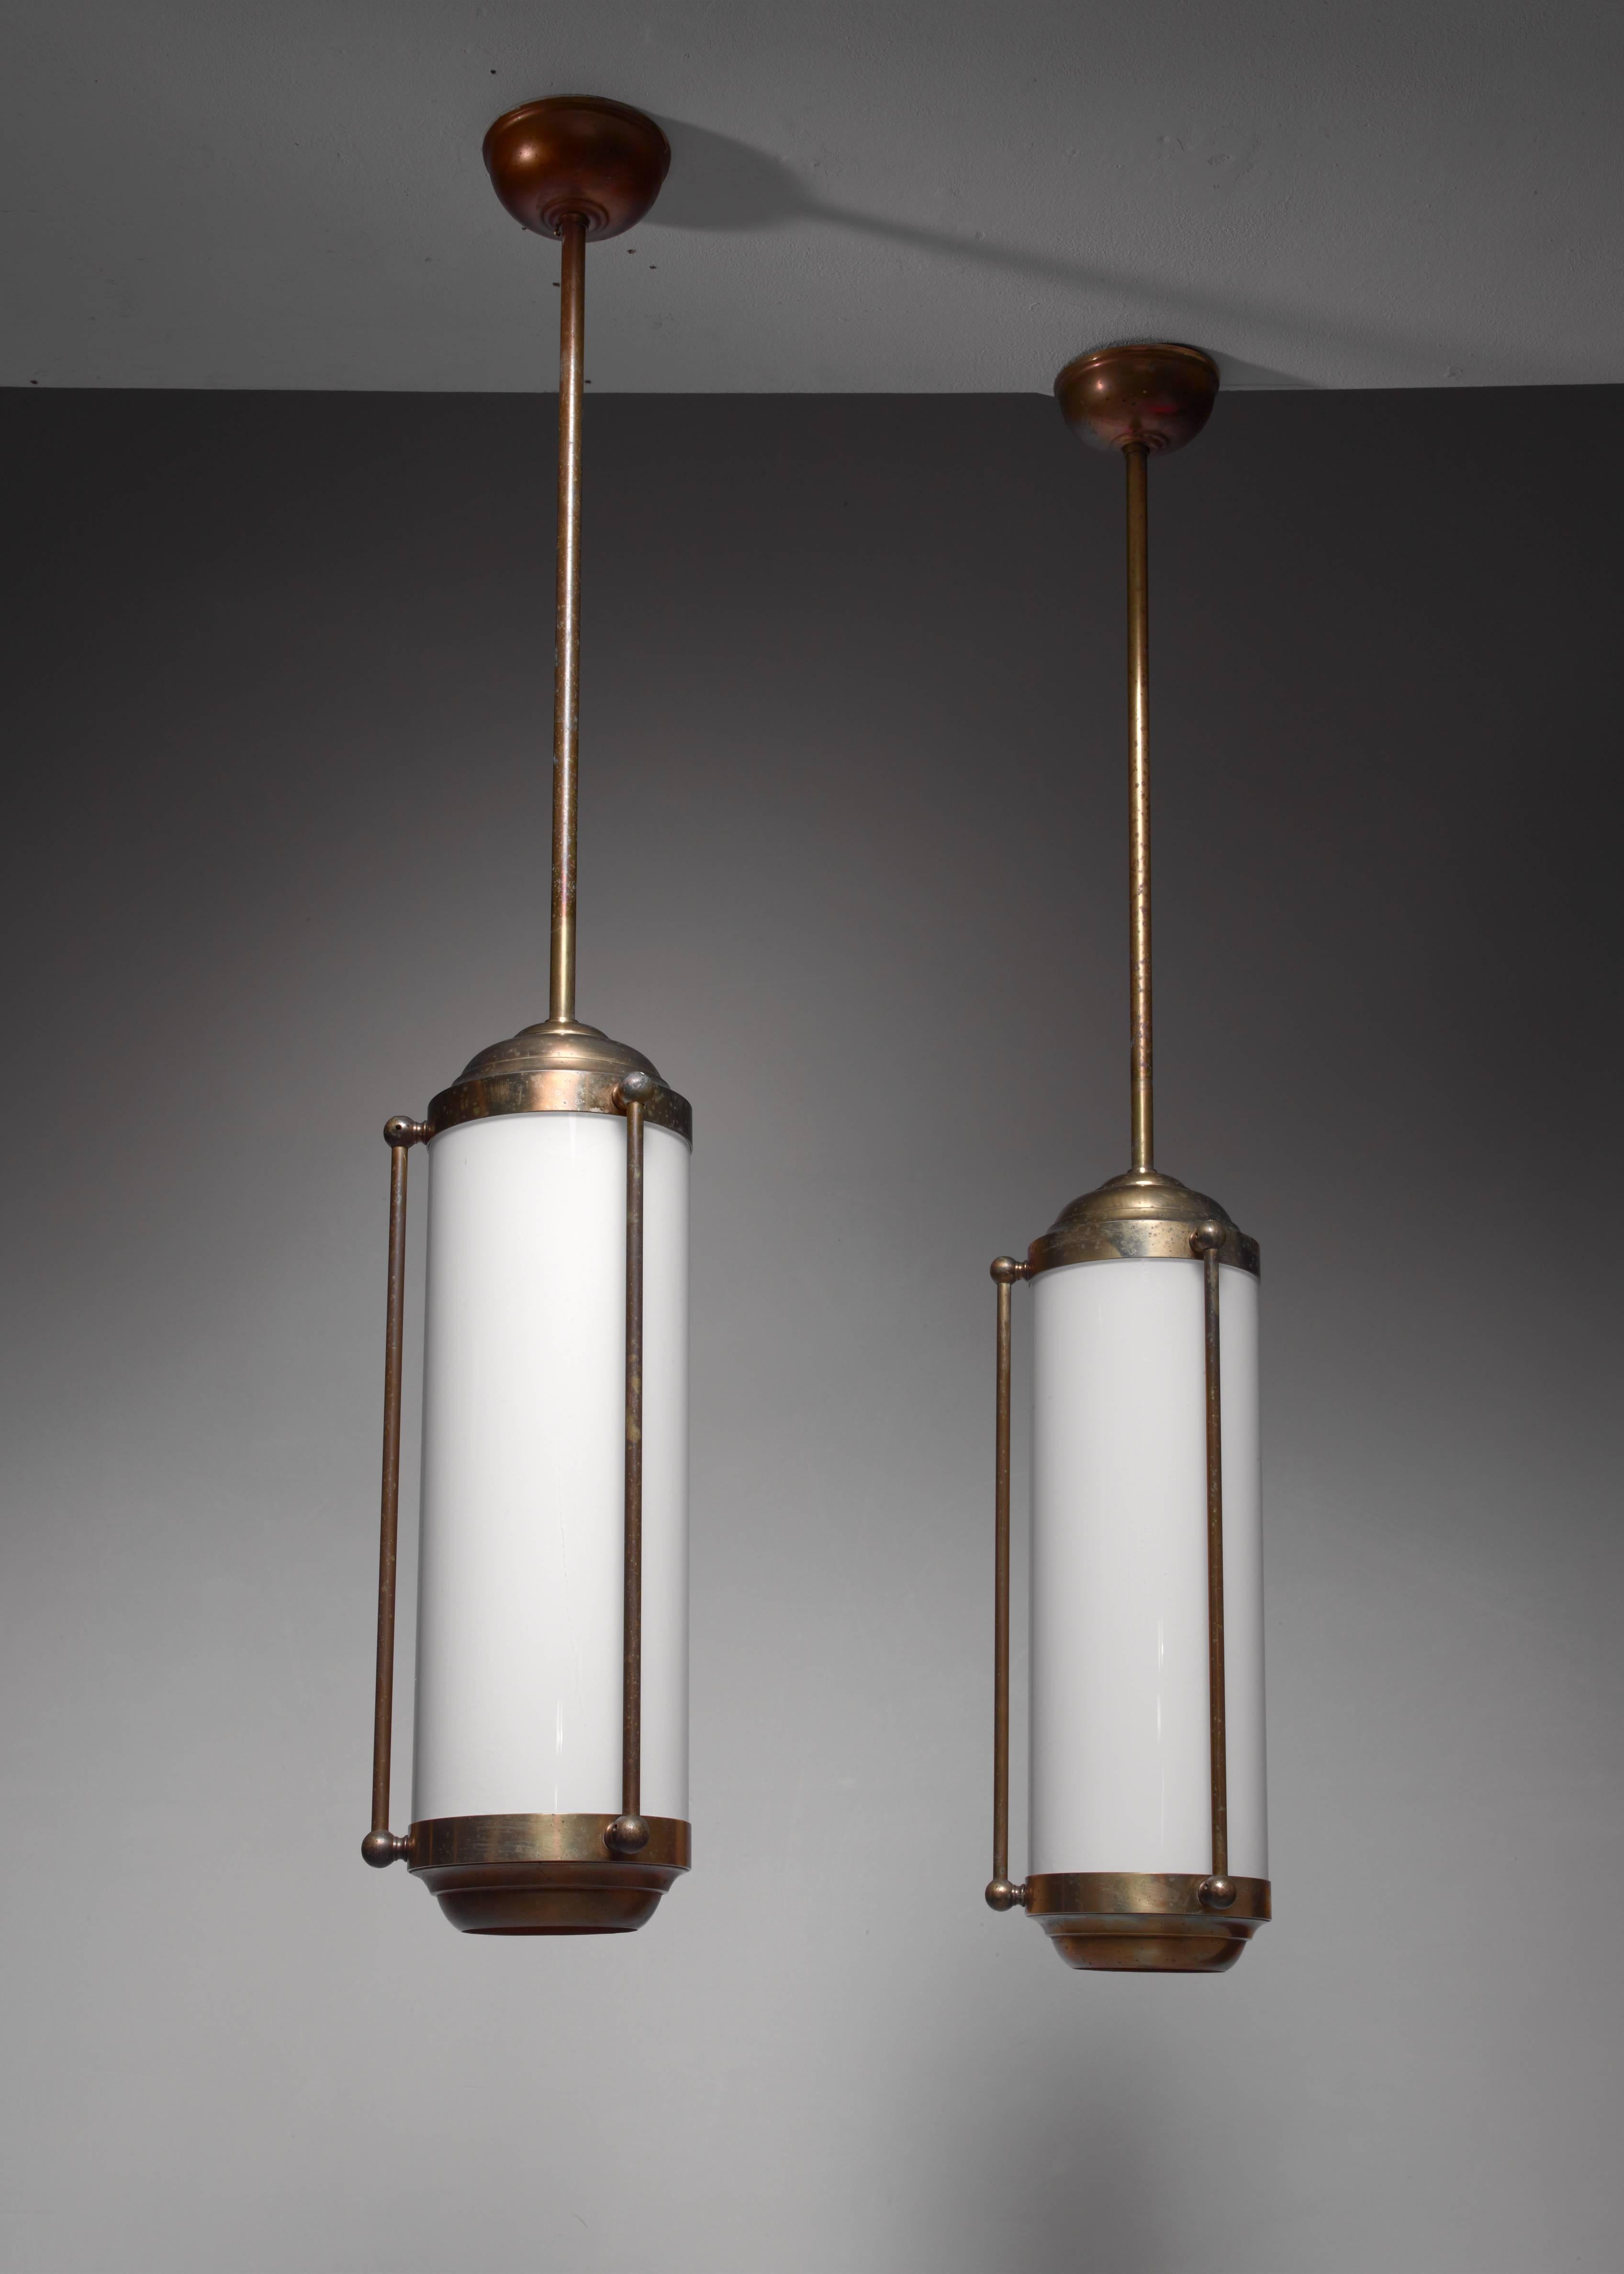 A cylindrical brass pendant lamp with a yellow plastic shade, hanging from a long brass stem.
We have a total of five of these lanterns available. The total drop can be adjusted. Wiring is checked and ready for immediate use.

The images show a